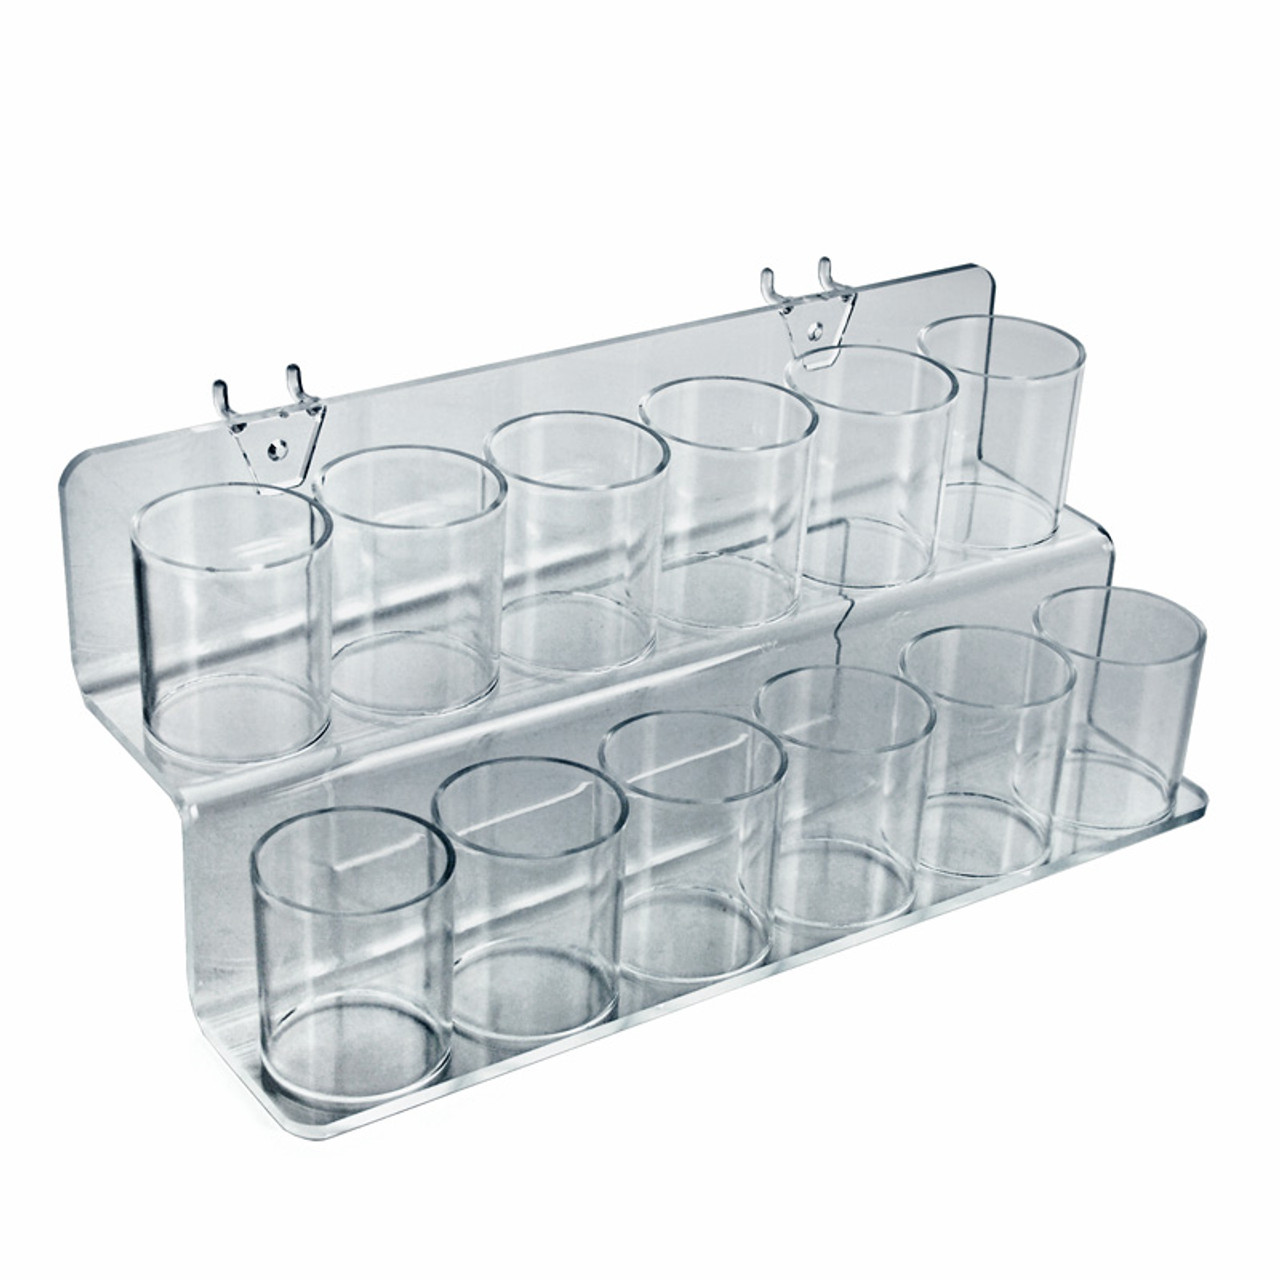 Large Clear Plastic Molded Bucket, Storage Container Bin for Pegboard,  Slatwall, or Counter with 2 Metal U-Hooks, Size: 8W x 9D x 9H, 4-Pack -  Azar Displays